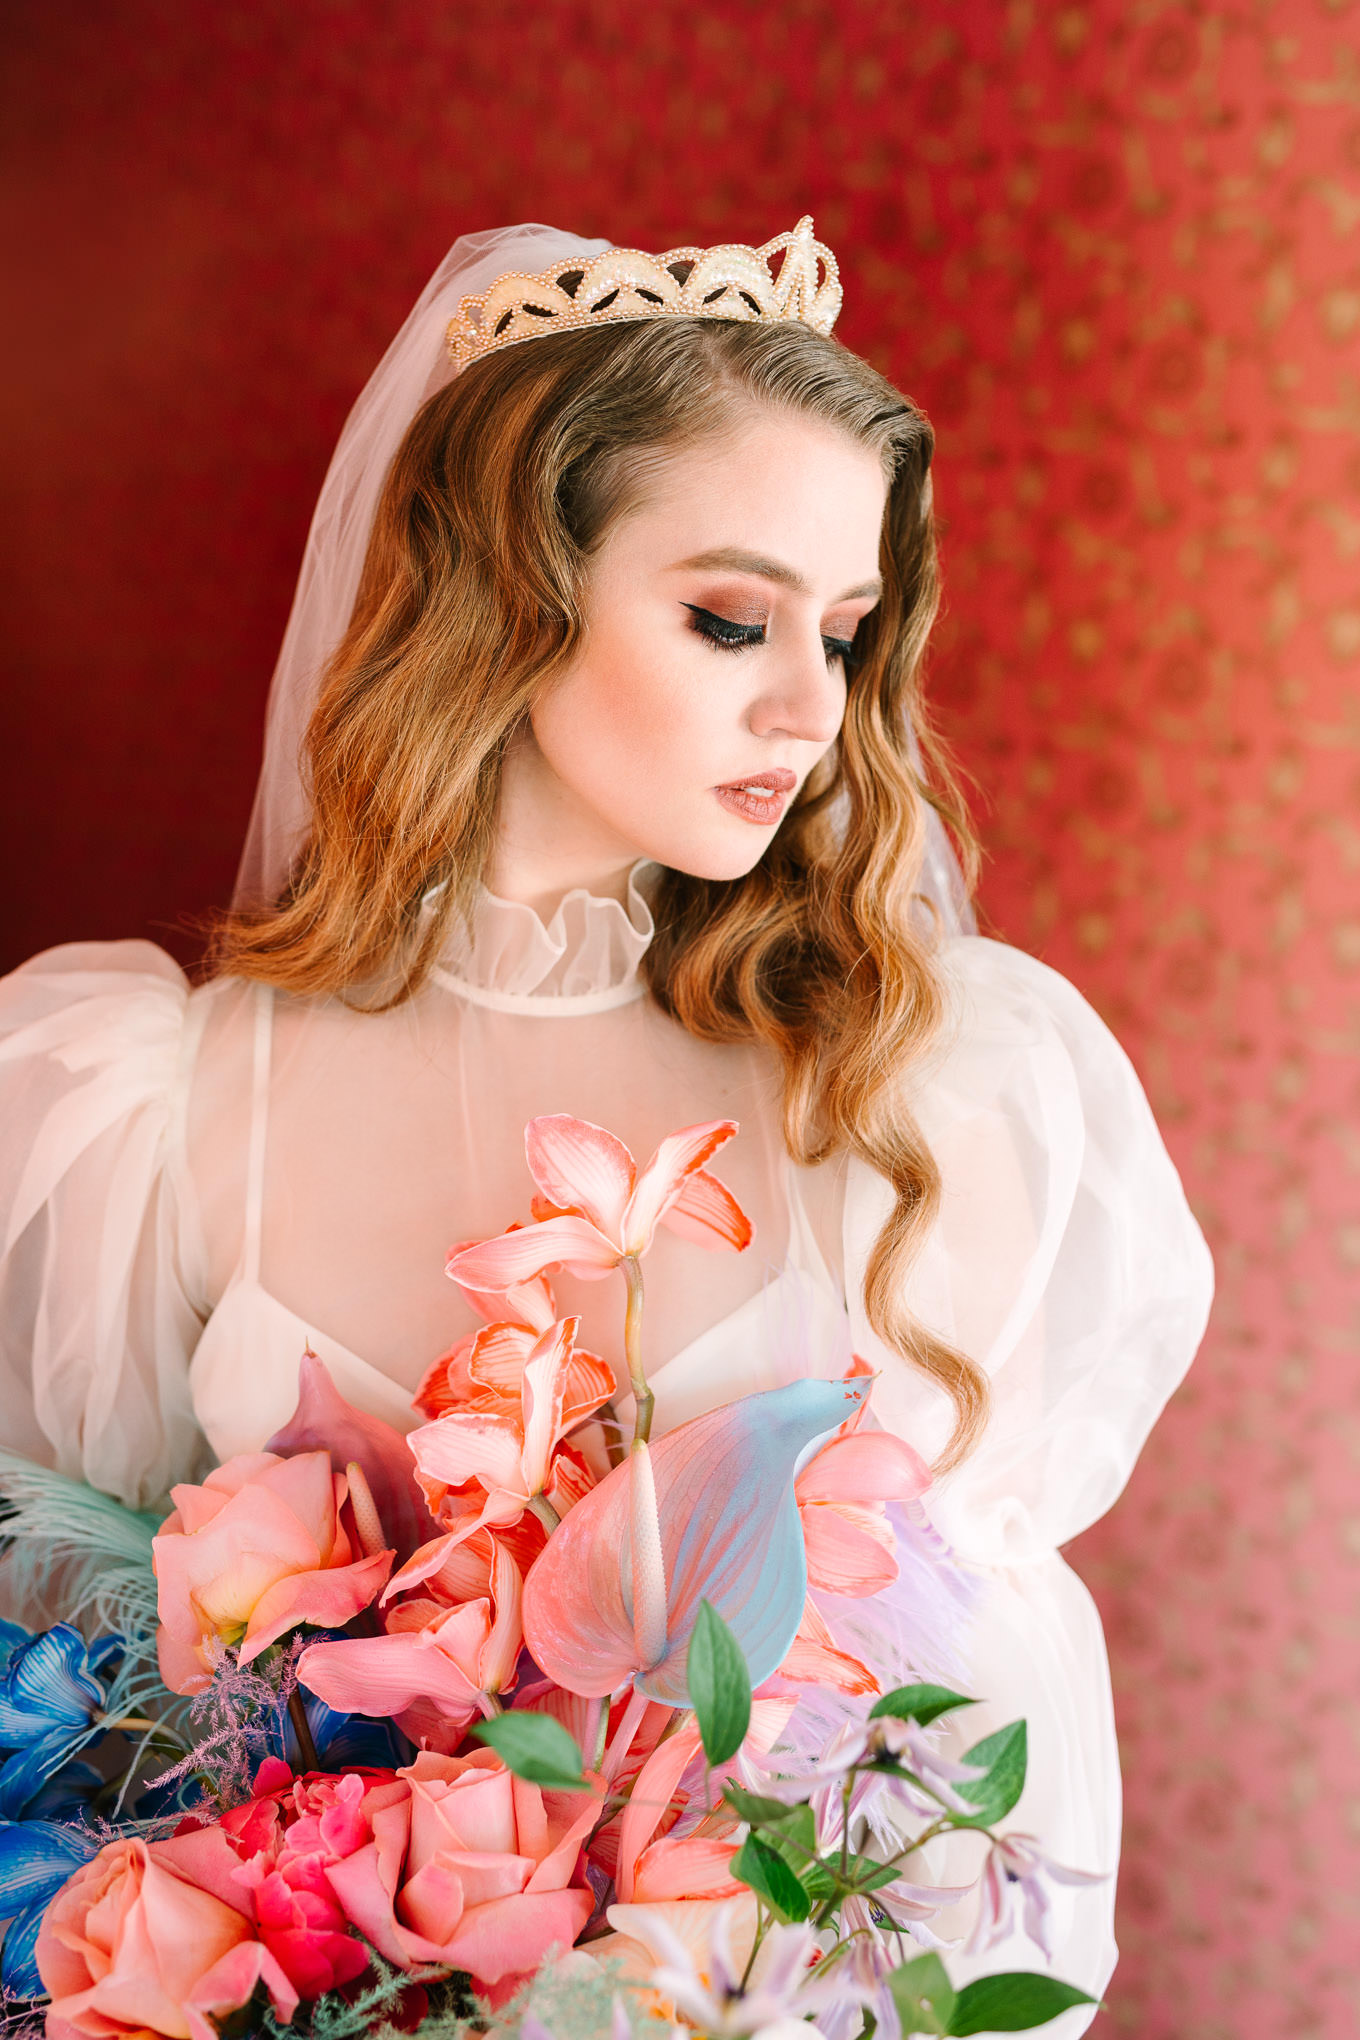 Allison Harvard bridal portrait at the Madonna Inn | Colorful and quirky wedding at Higuera Ranch in San Luis Obispo | #sanluisobispowedding #californiawedding #higueraranch #madonnainn   Source: Mary Costa Photography | Los Angeles